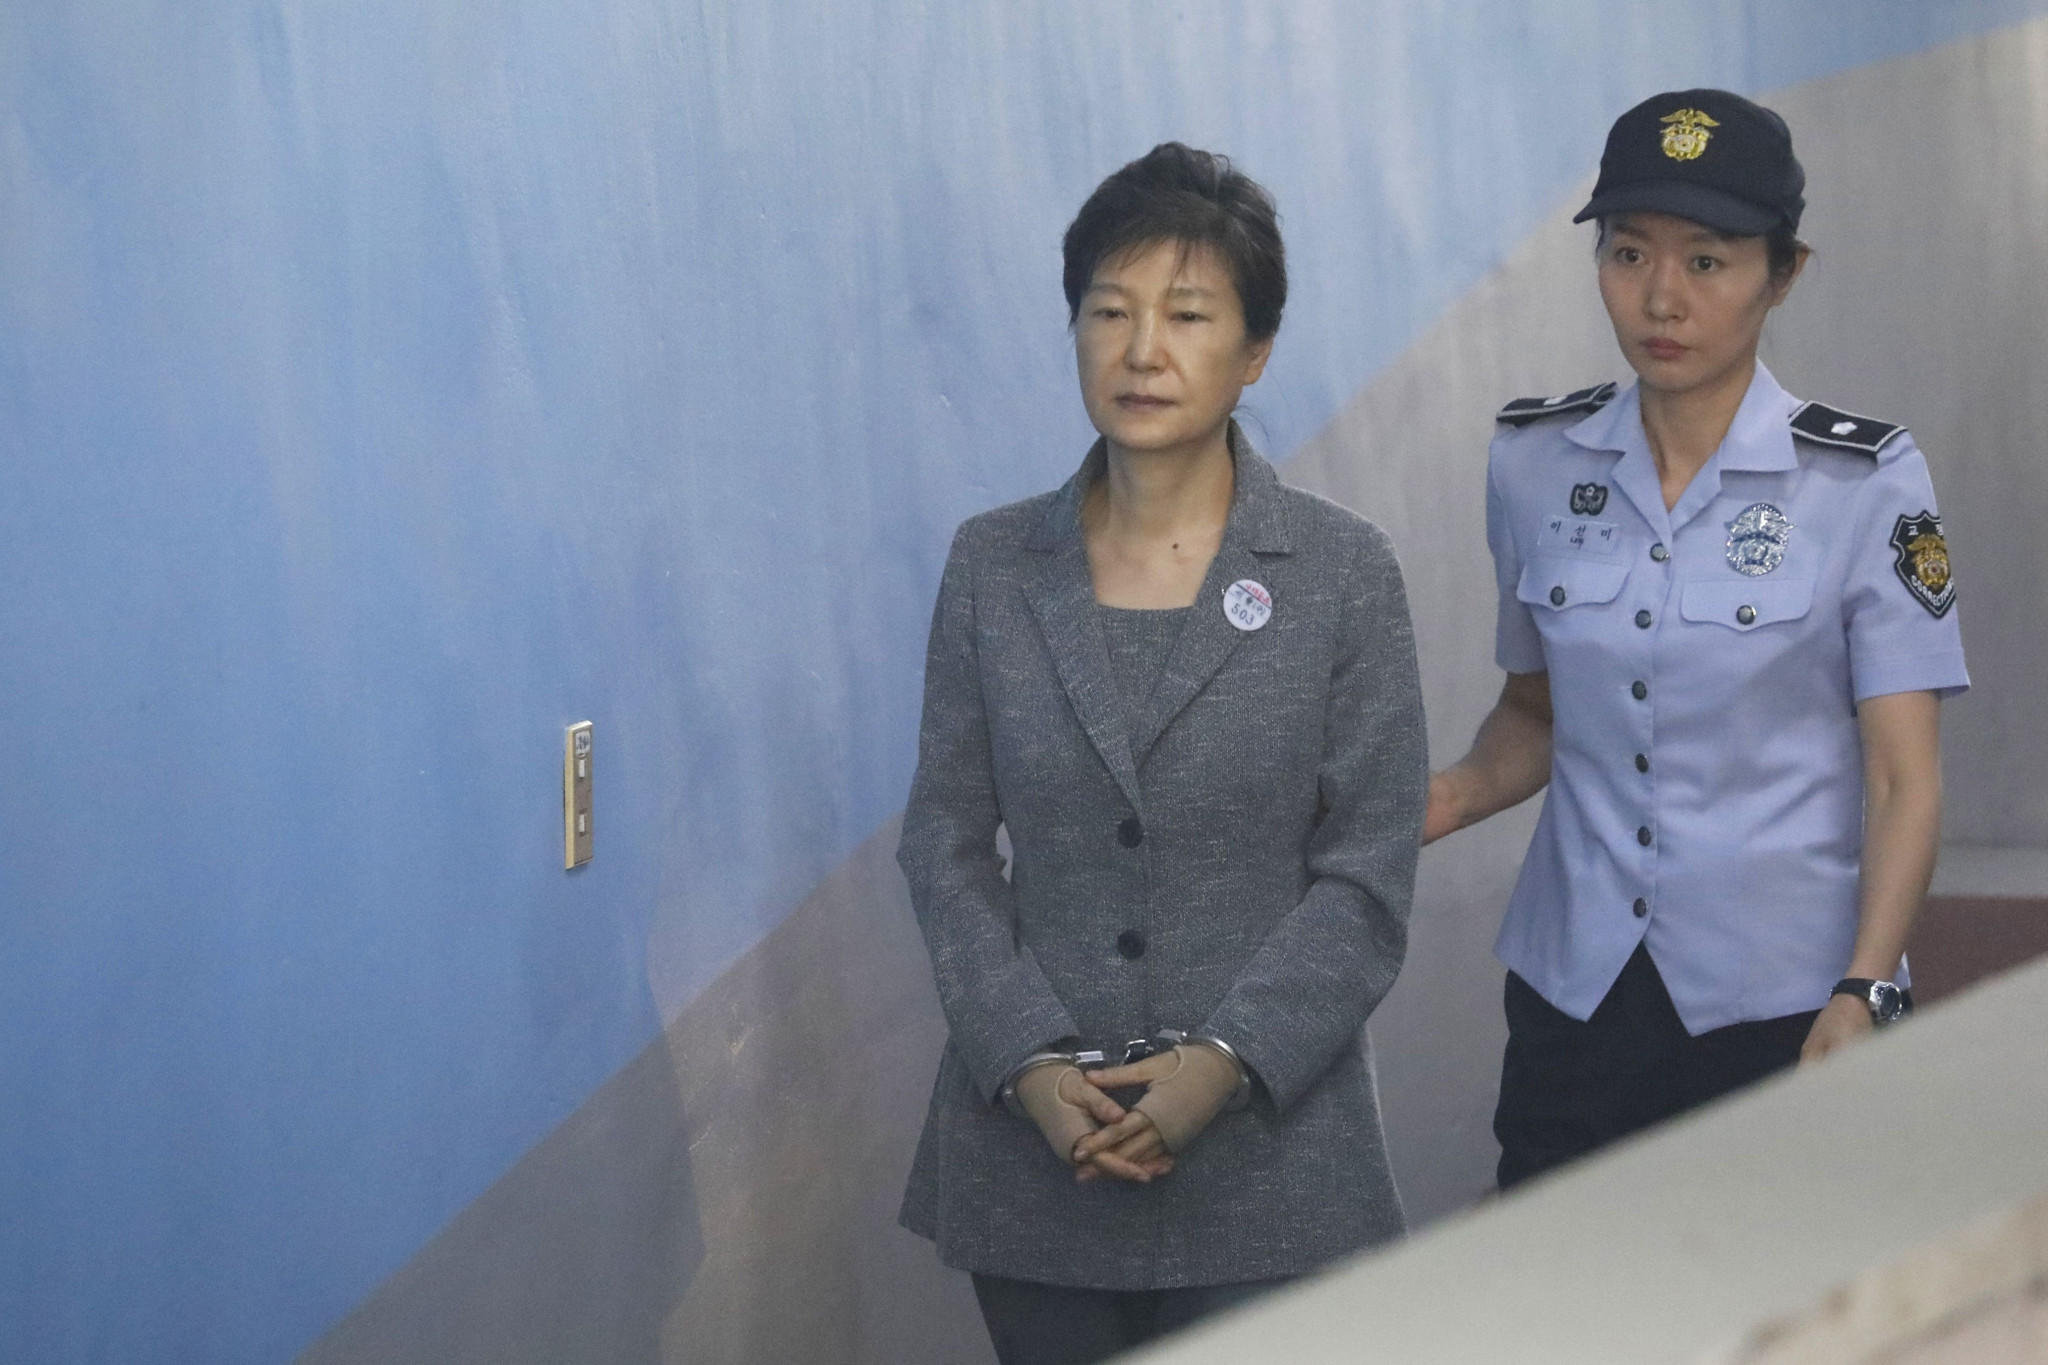 Park pardoned from 22-year prison sentence after Pyeongchang 2018 corruption